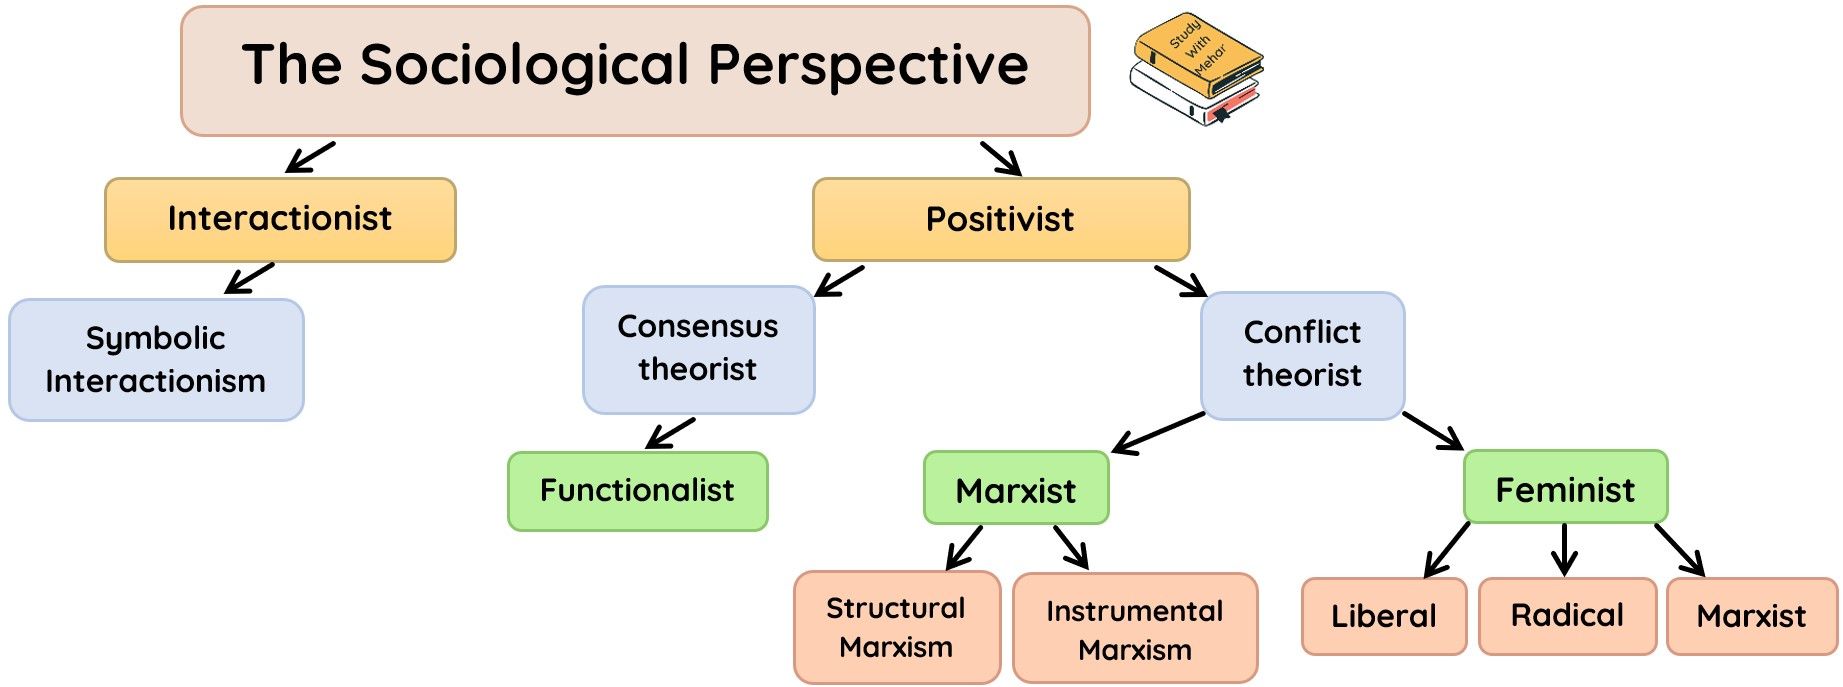 Sociological-Perspective-4---Study-With-Mehar-1